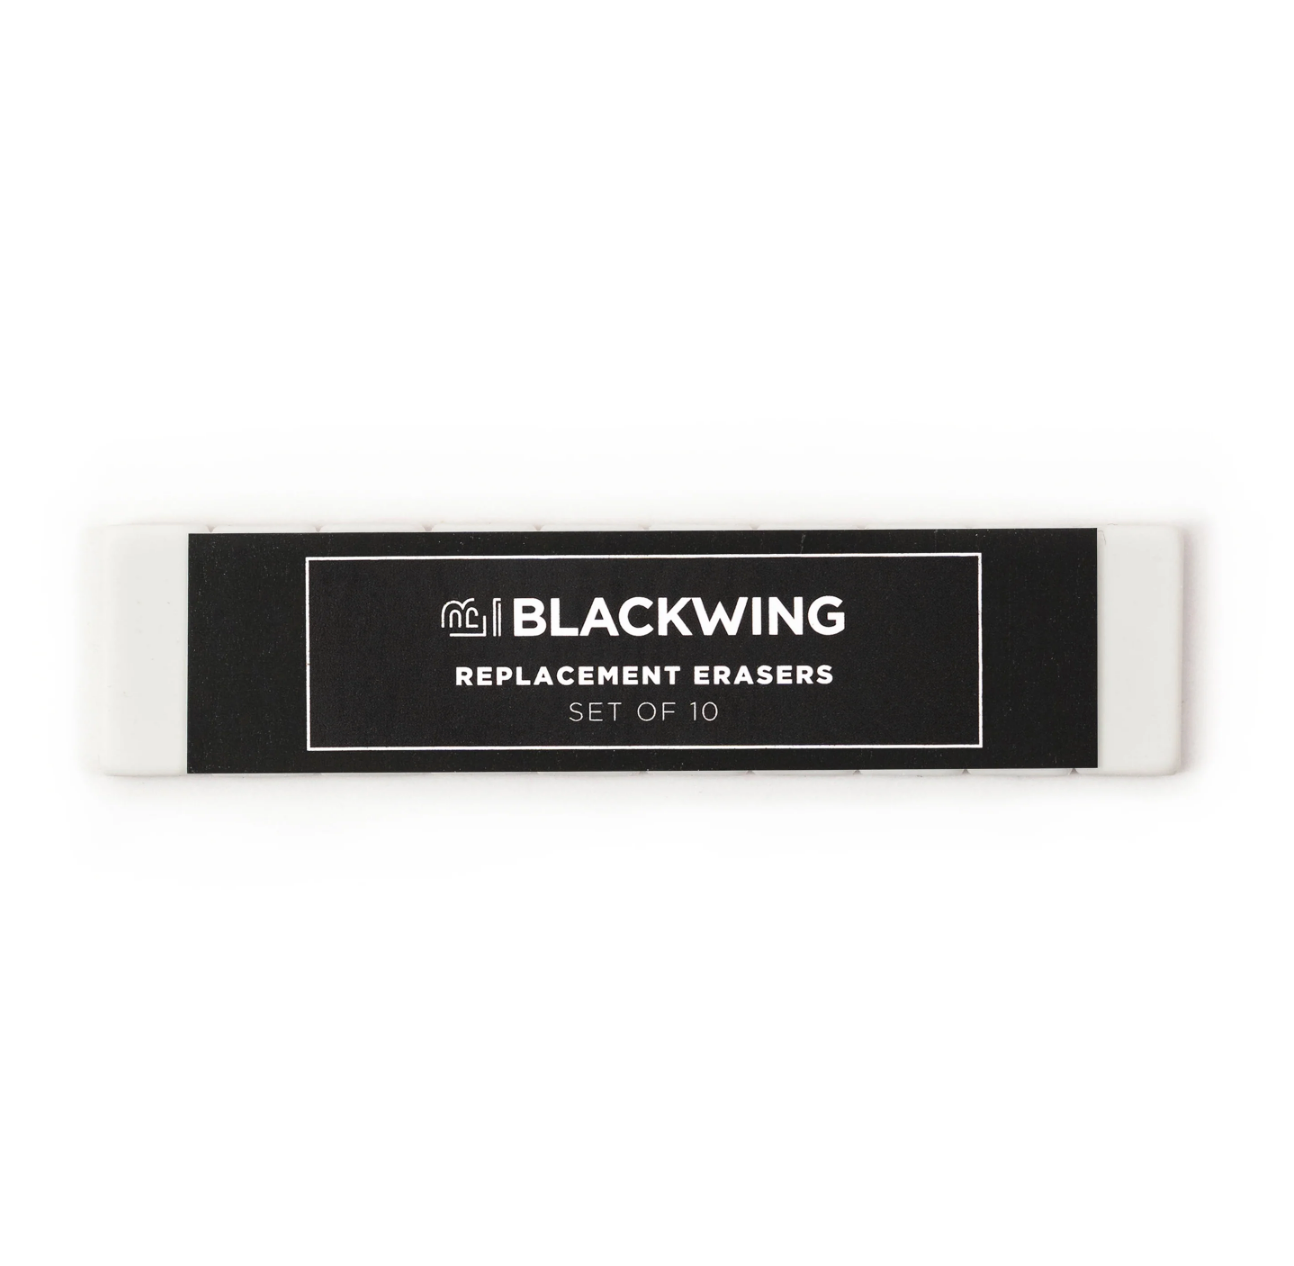 Blackwing Pencils have always been known for their iconic, replaceable, square erasers. To replace your eraser, slide the eraser and clip out of the ferrule, remove the clip from the old eraser, place the new eraser into the clip, and insert the new eraser and clip into the ferrule.  Replacement erasers come in sets of 10 and are available in black, white, pink, green, blue, navy blue, orange, yellow, red and grey.  Details: Set of 10 Pencil Eraser Replacements Single-Color Packs